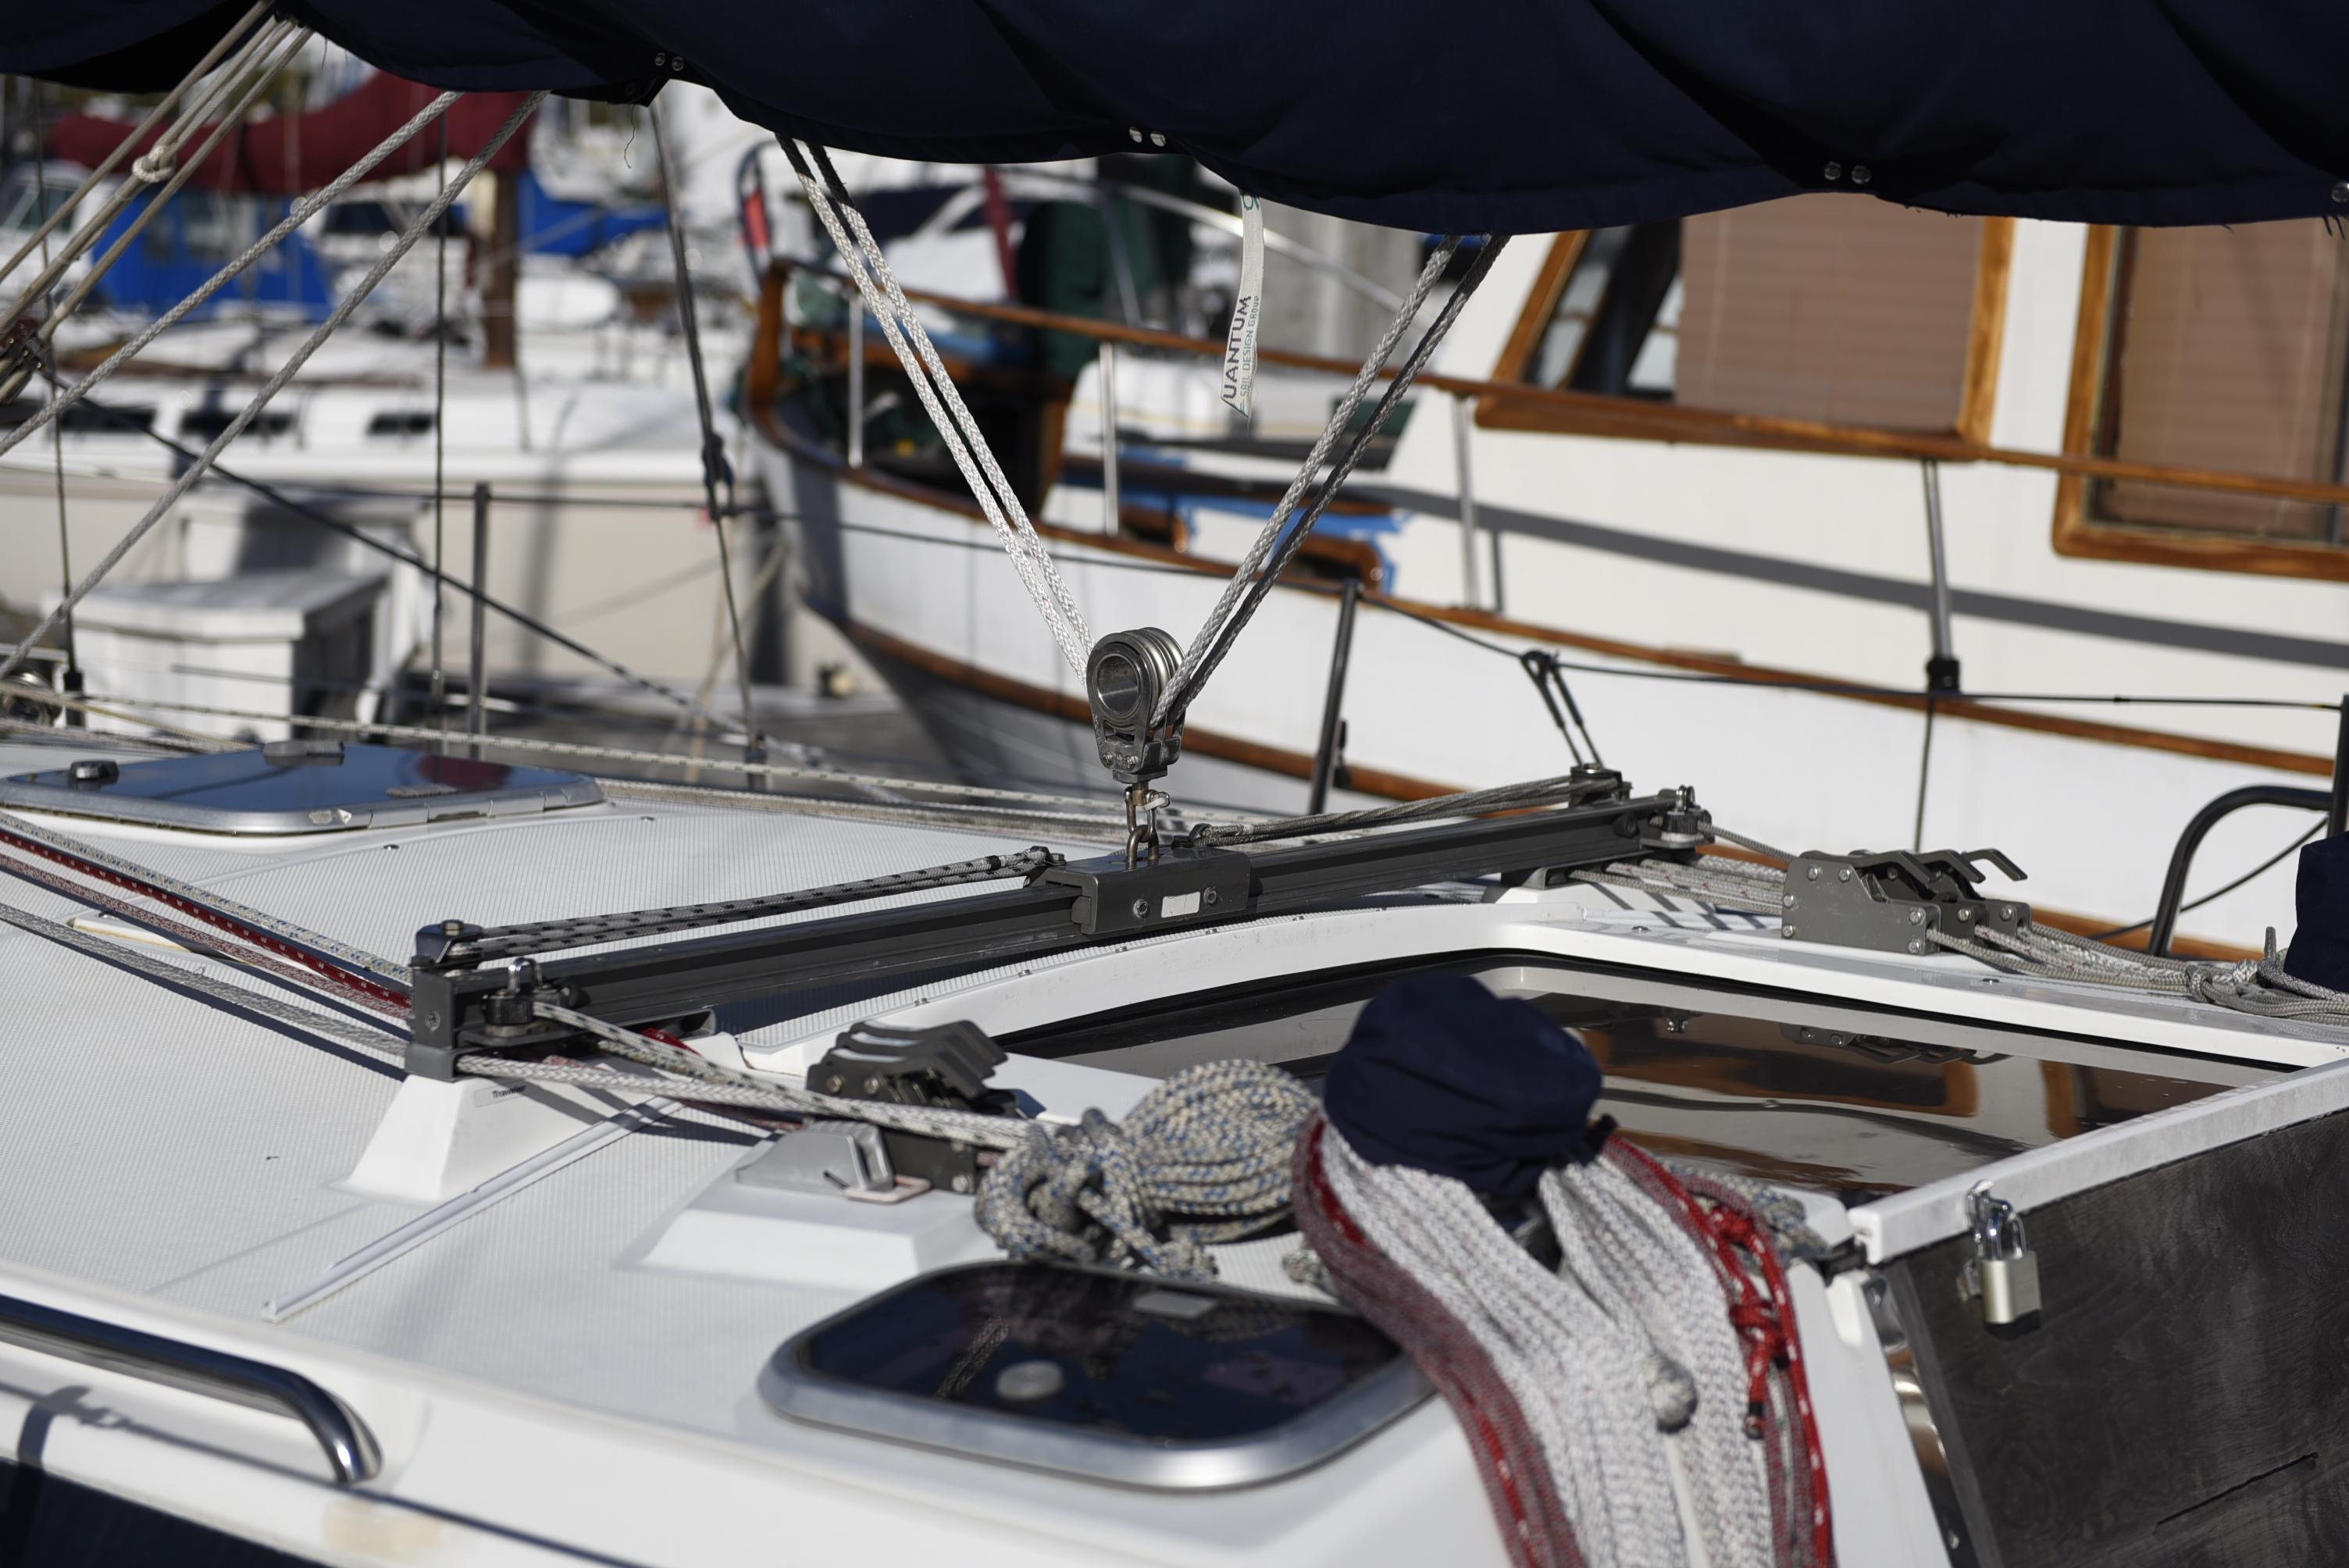 Lines and halyards all lead to the cockpit